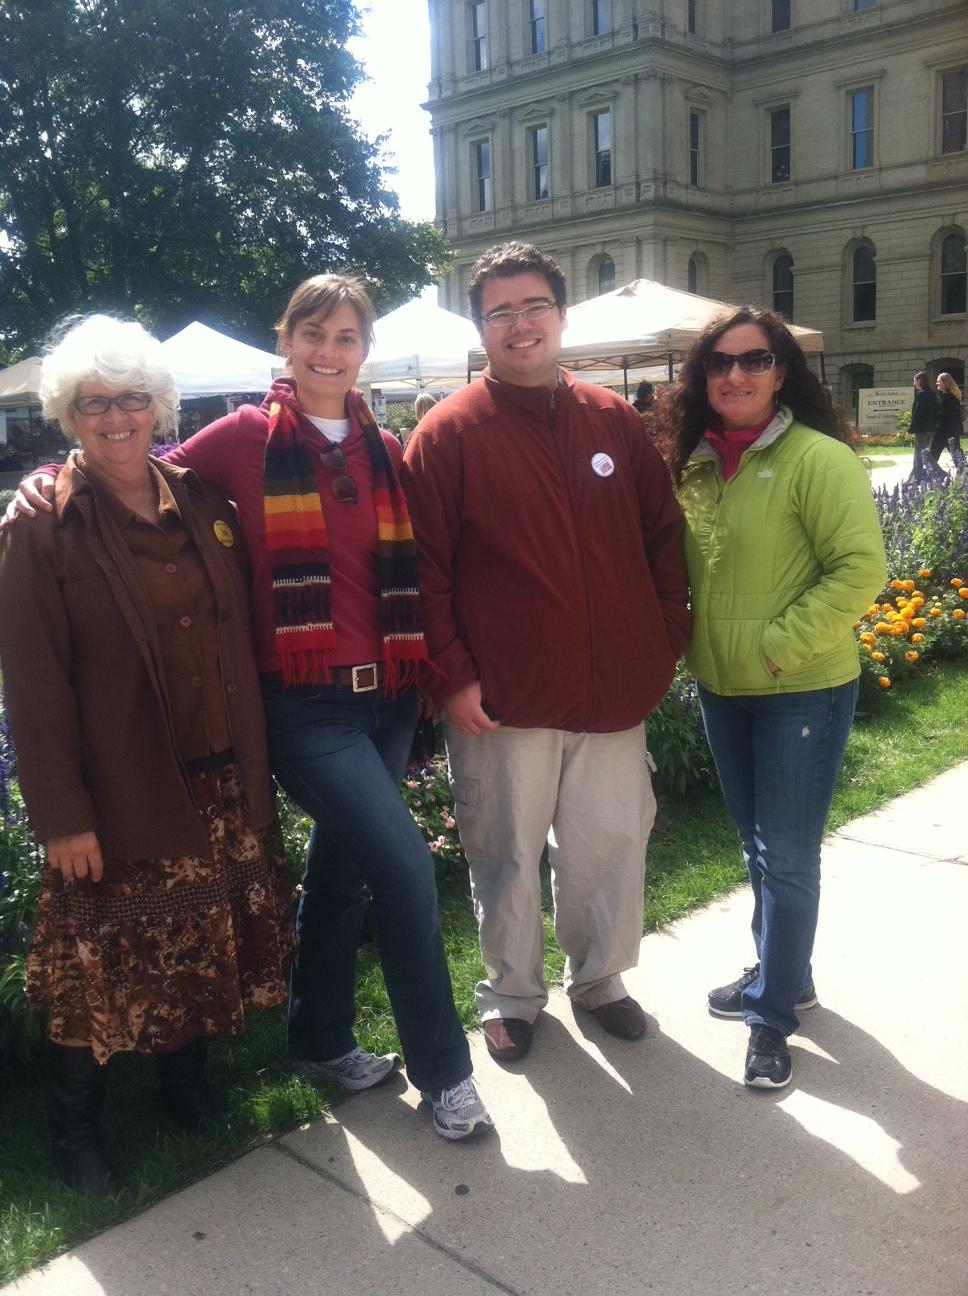 At the Farmers Market on the Capitol Lawn